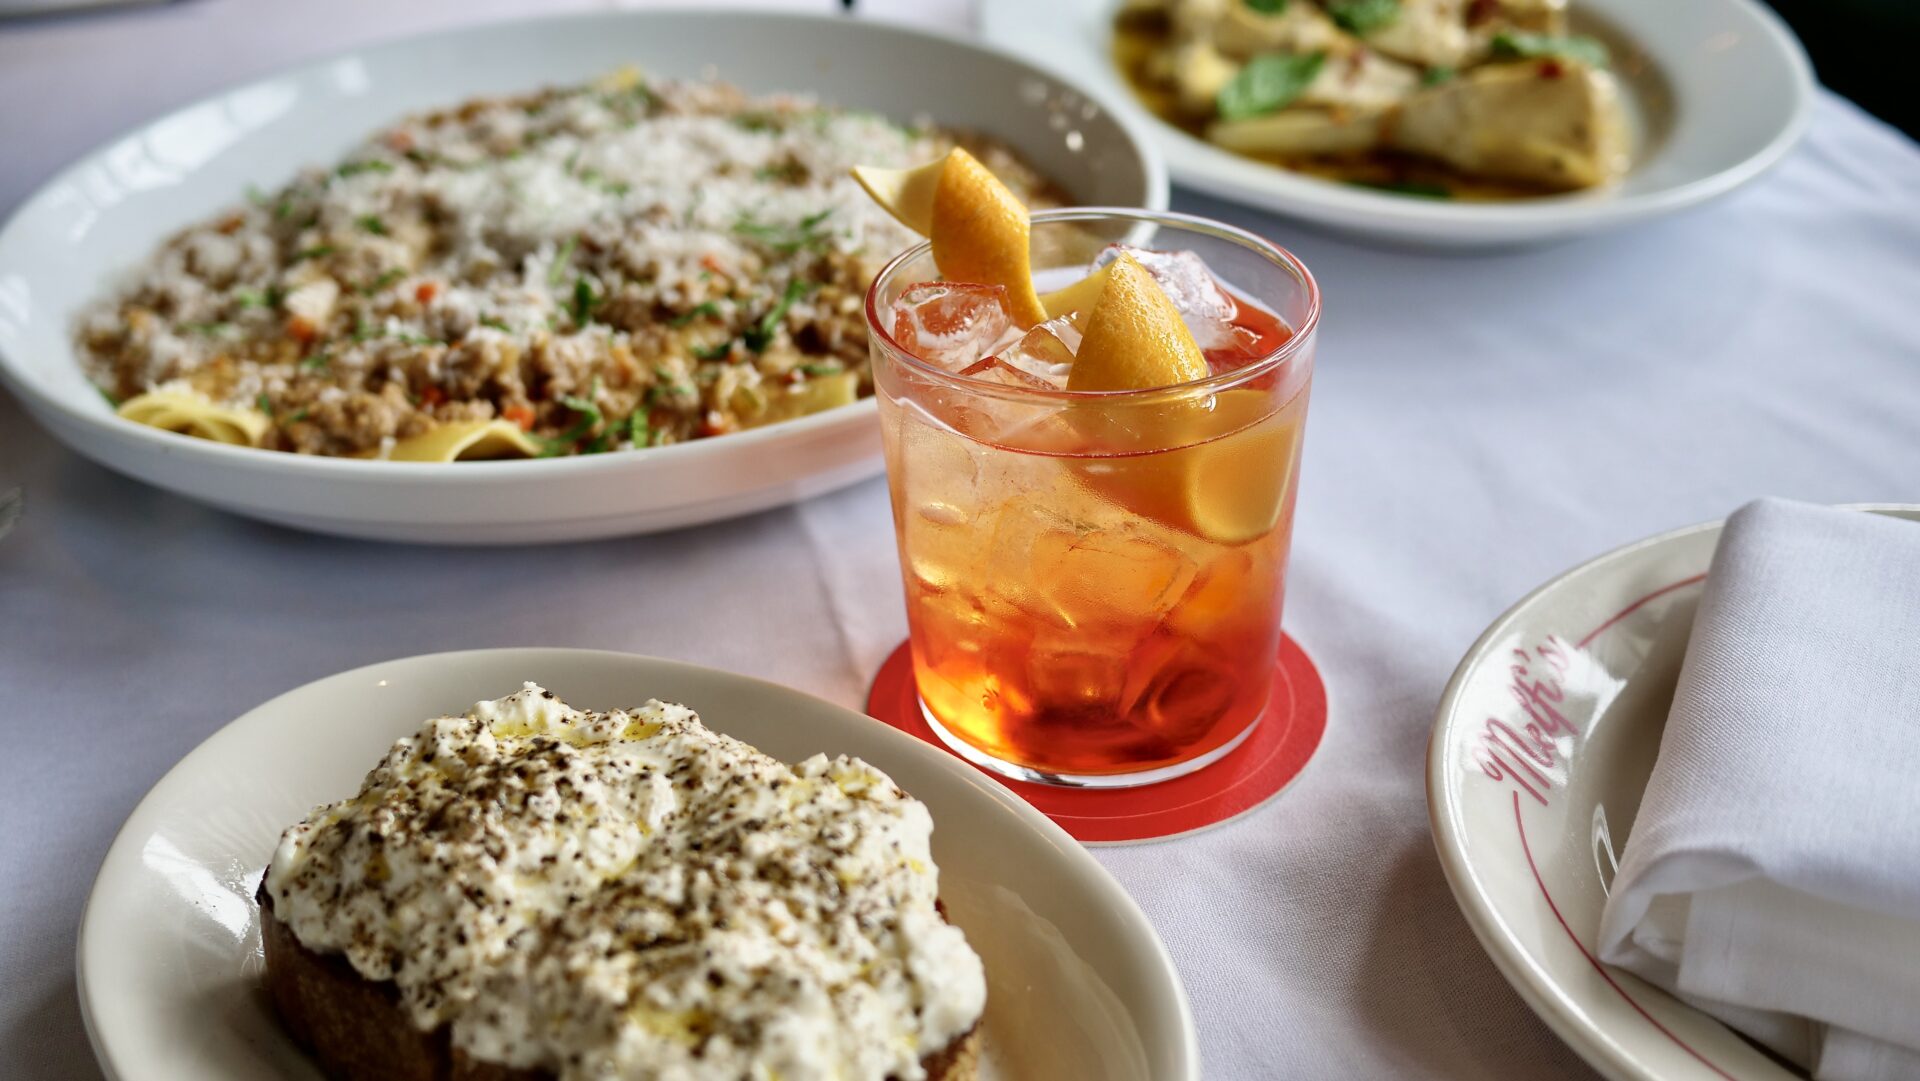 A cocktail amidst plates of pasta at Melfi's in downtown Charleston